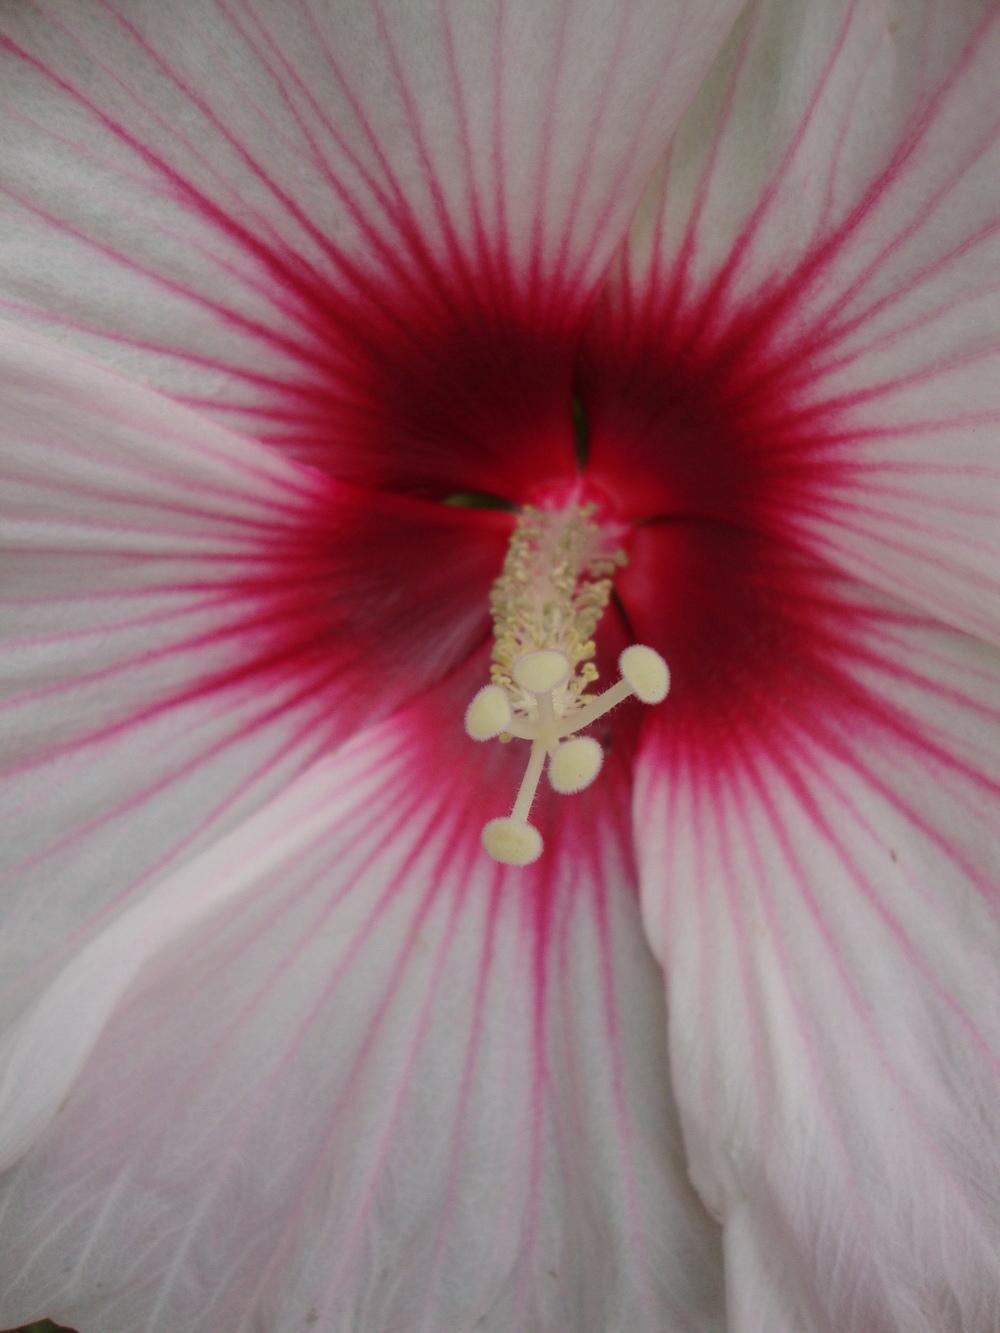 Photo of Hardy Hibiscus (Hibiscus moscheutos) uploaded by Paul2032